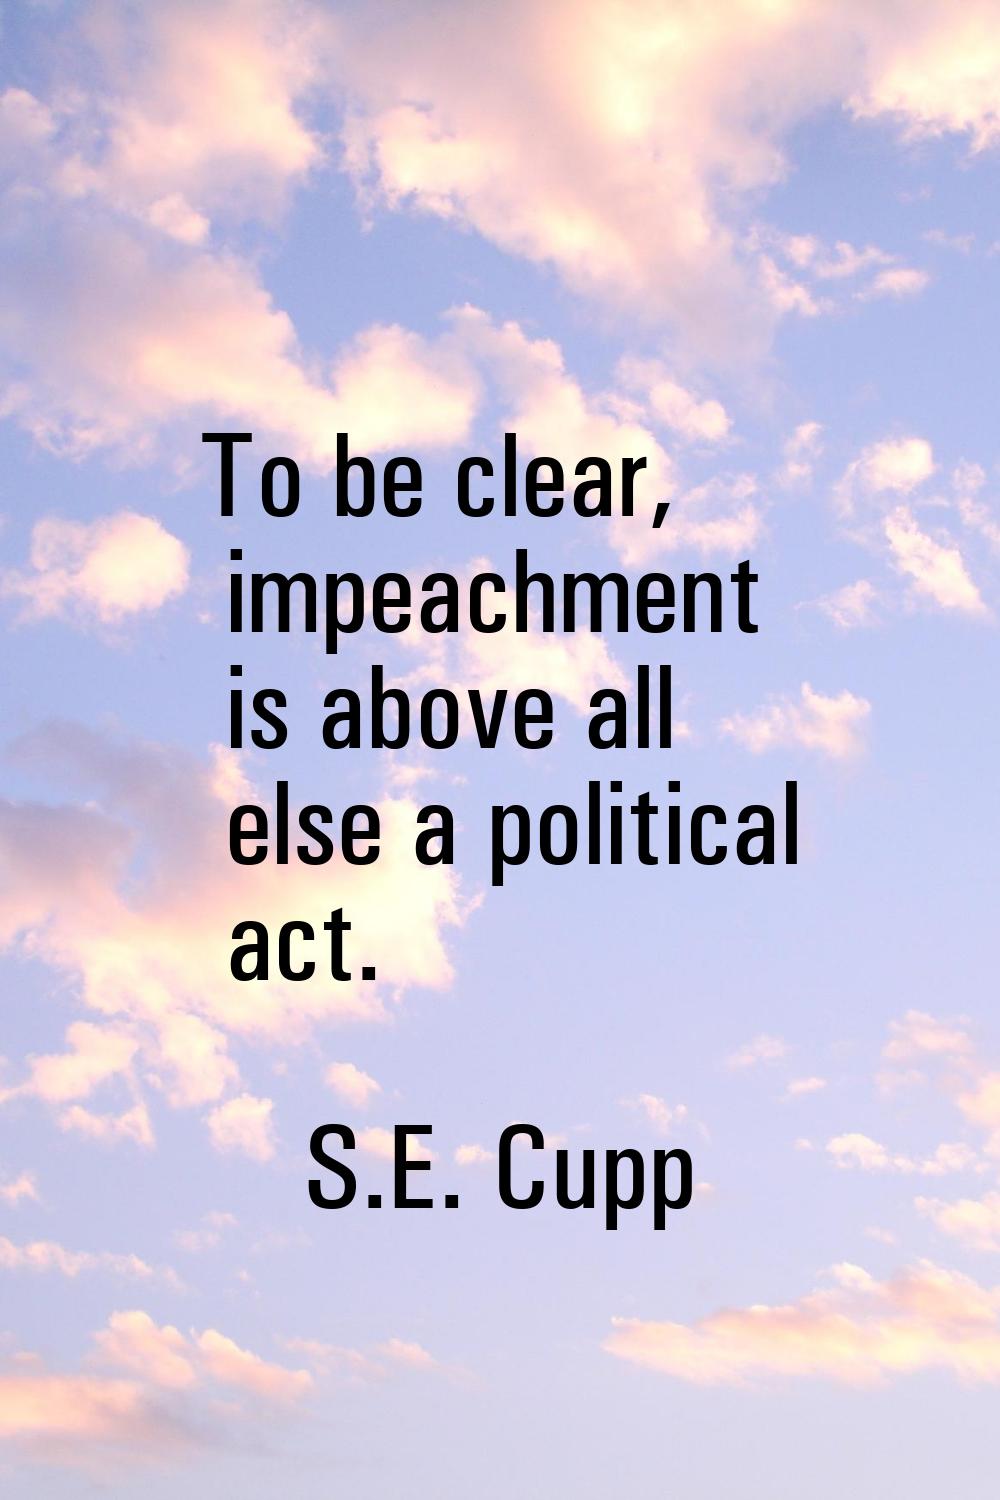 To be clear, impeachment is above all else a political act.